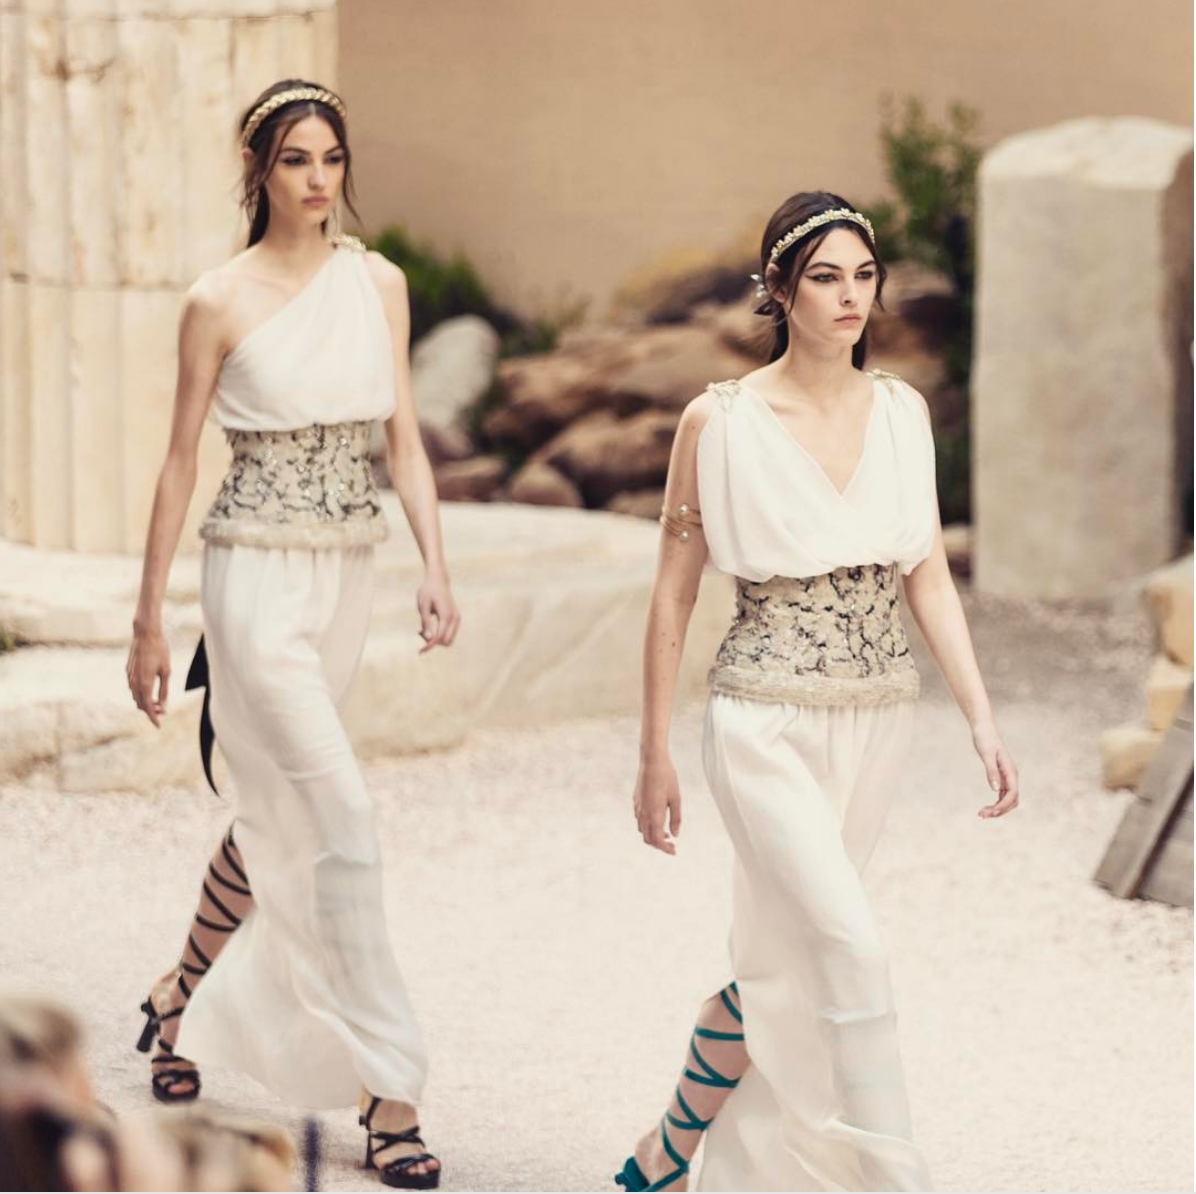 Blog: Walk Like an Egyptian? How Modern Fashion Appropriates Antiquity |  Society for Classical Studies